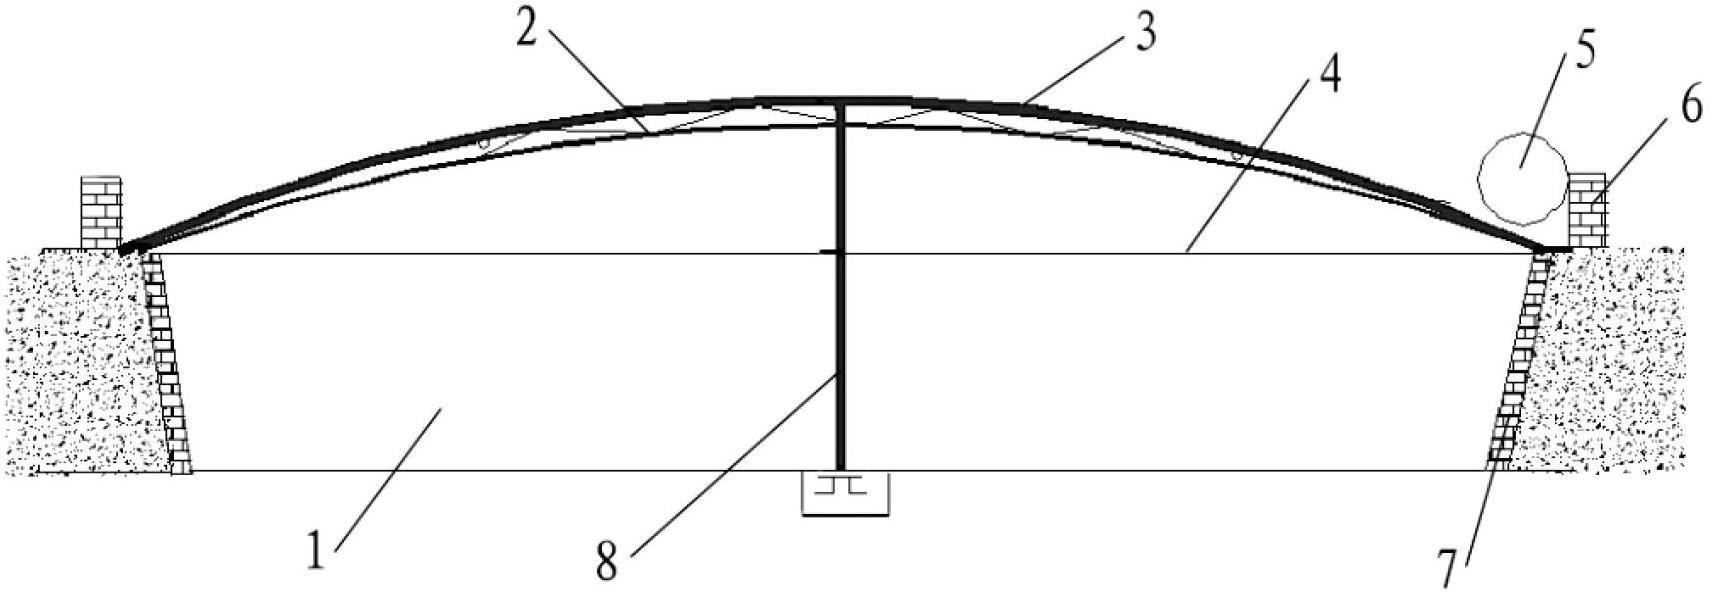 Groove-type solar greenhouse and method for constructing same